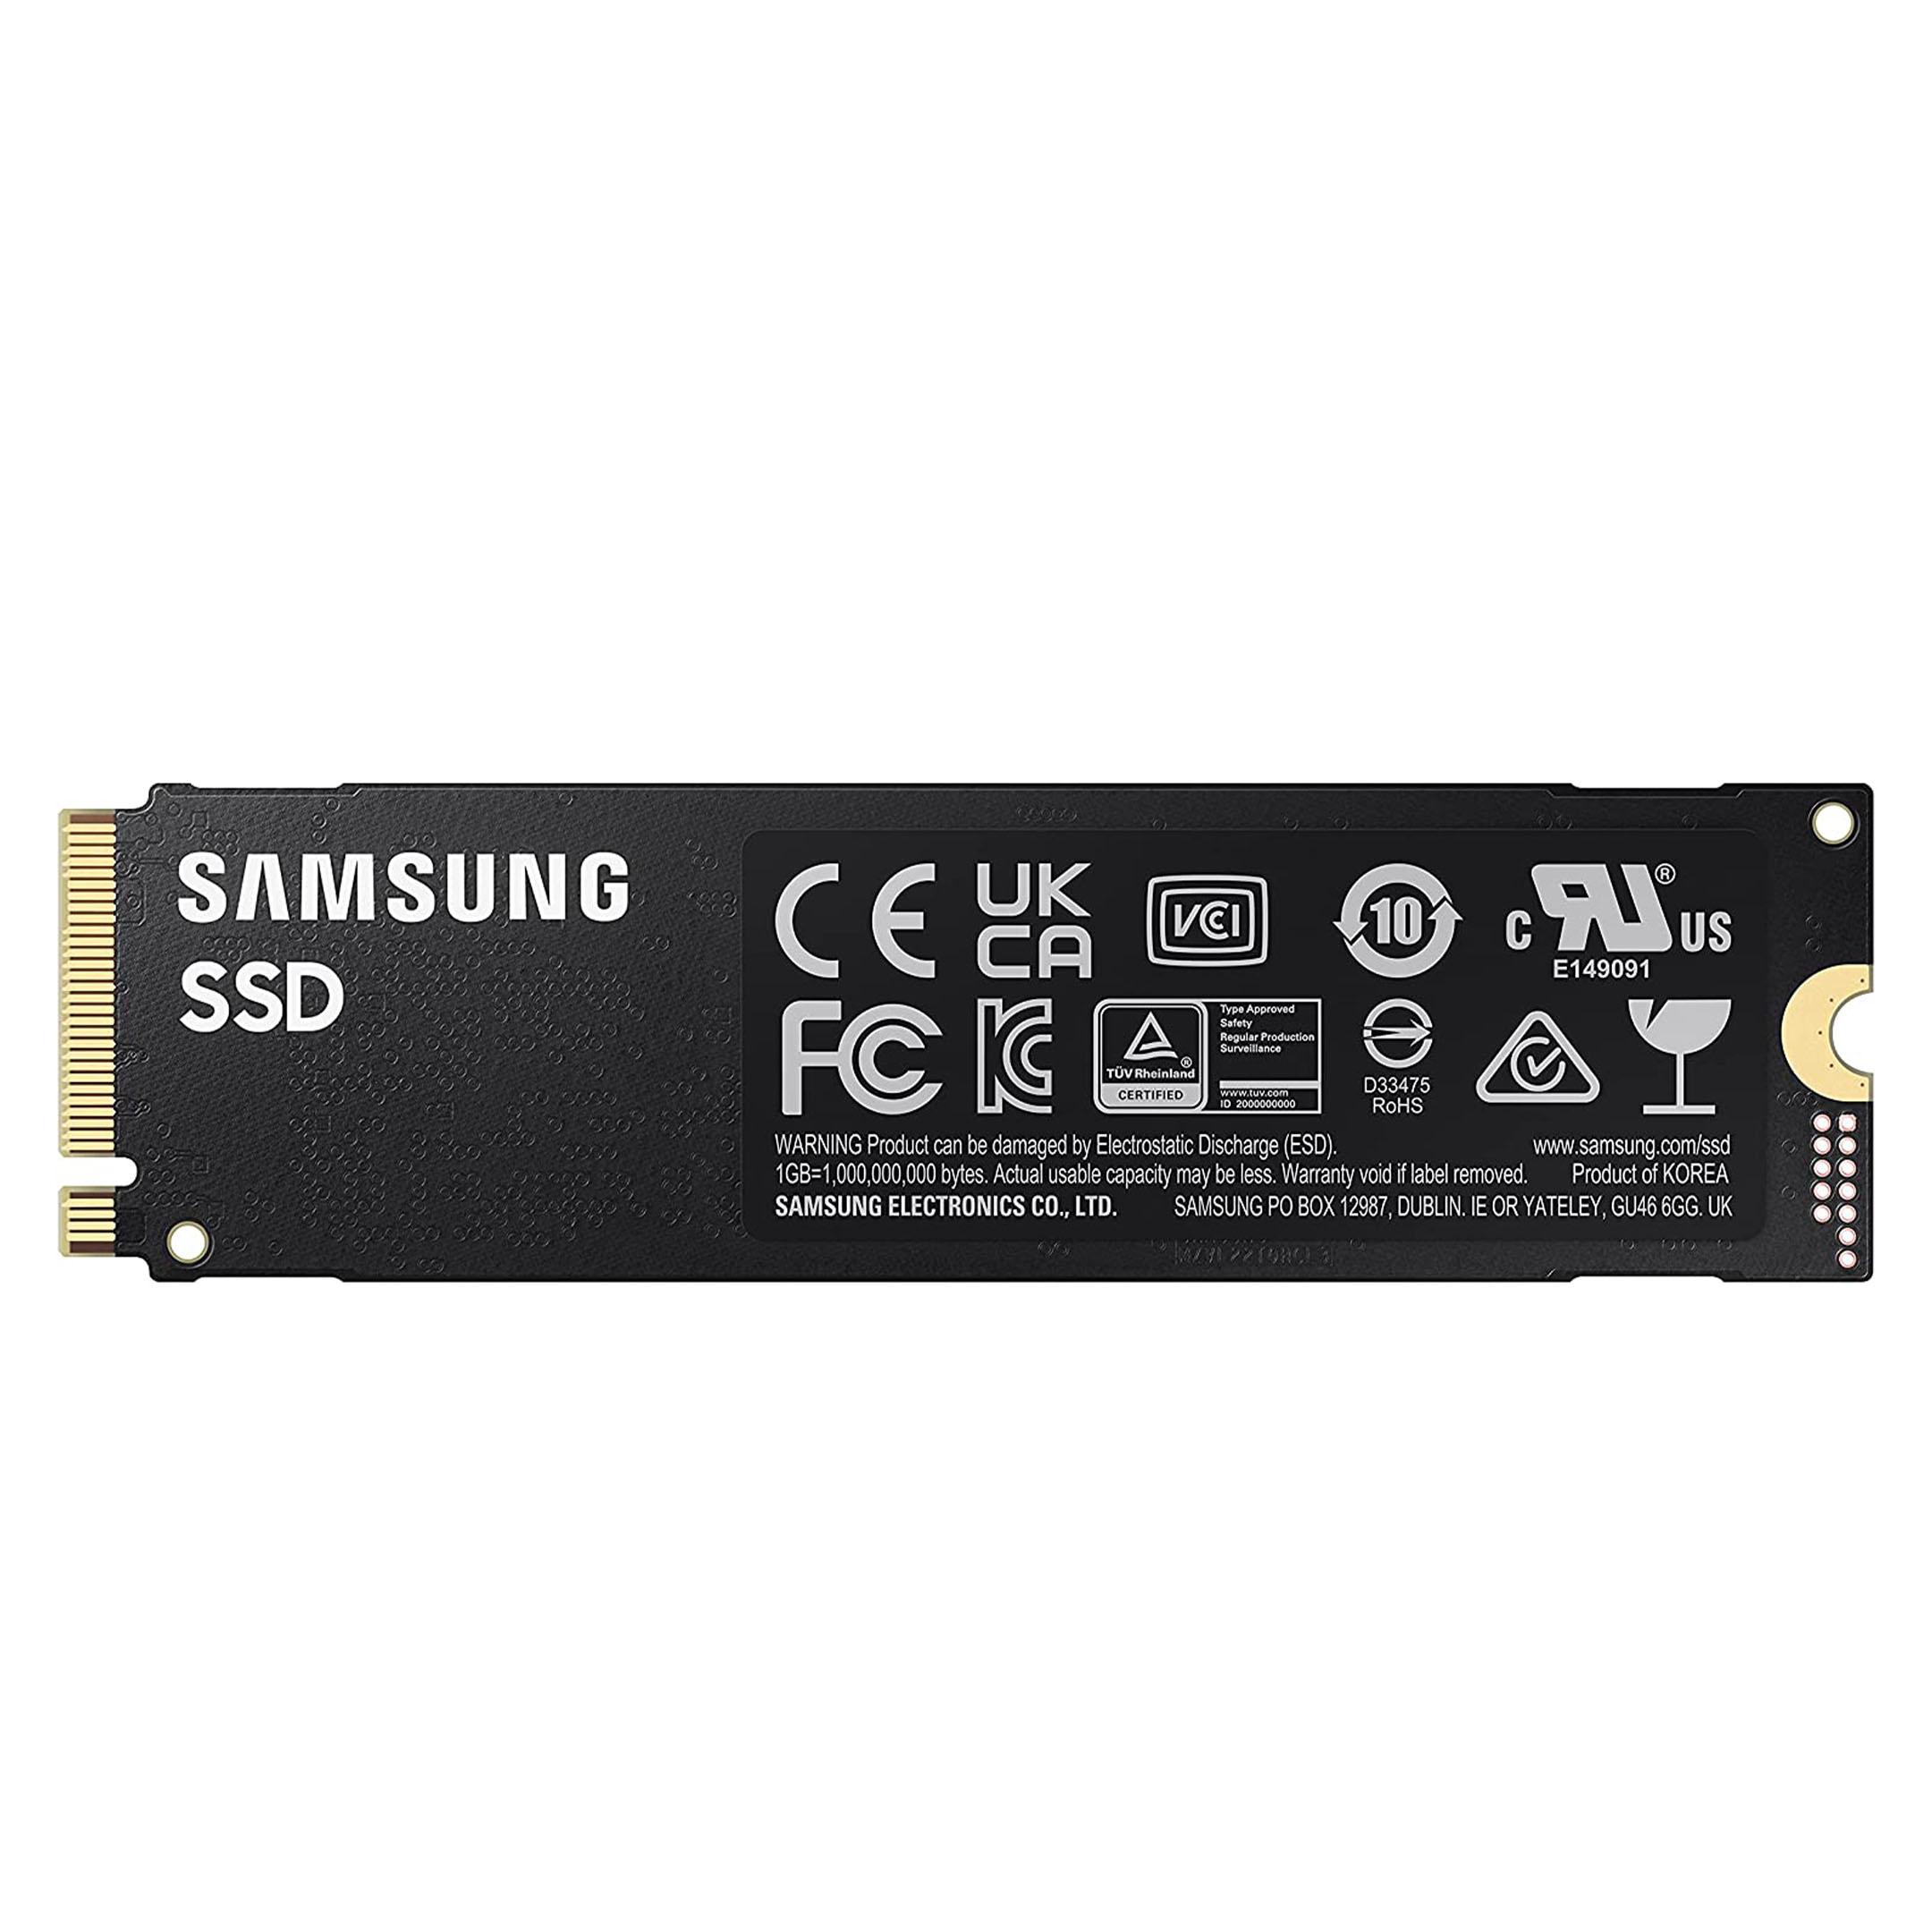 SAMSUNG 980 PRO 2TB 4 NVMe M.2 SOLID STATE DRIVE - MZ-V8P2T0BW